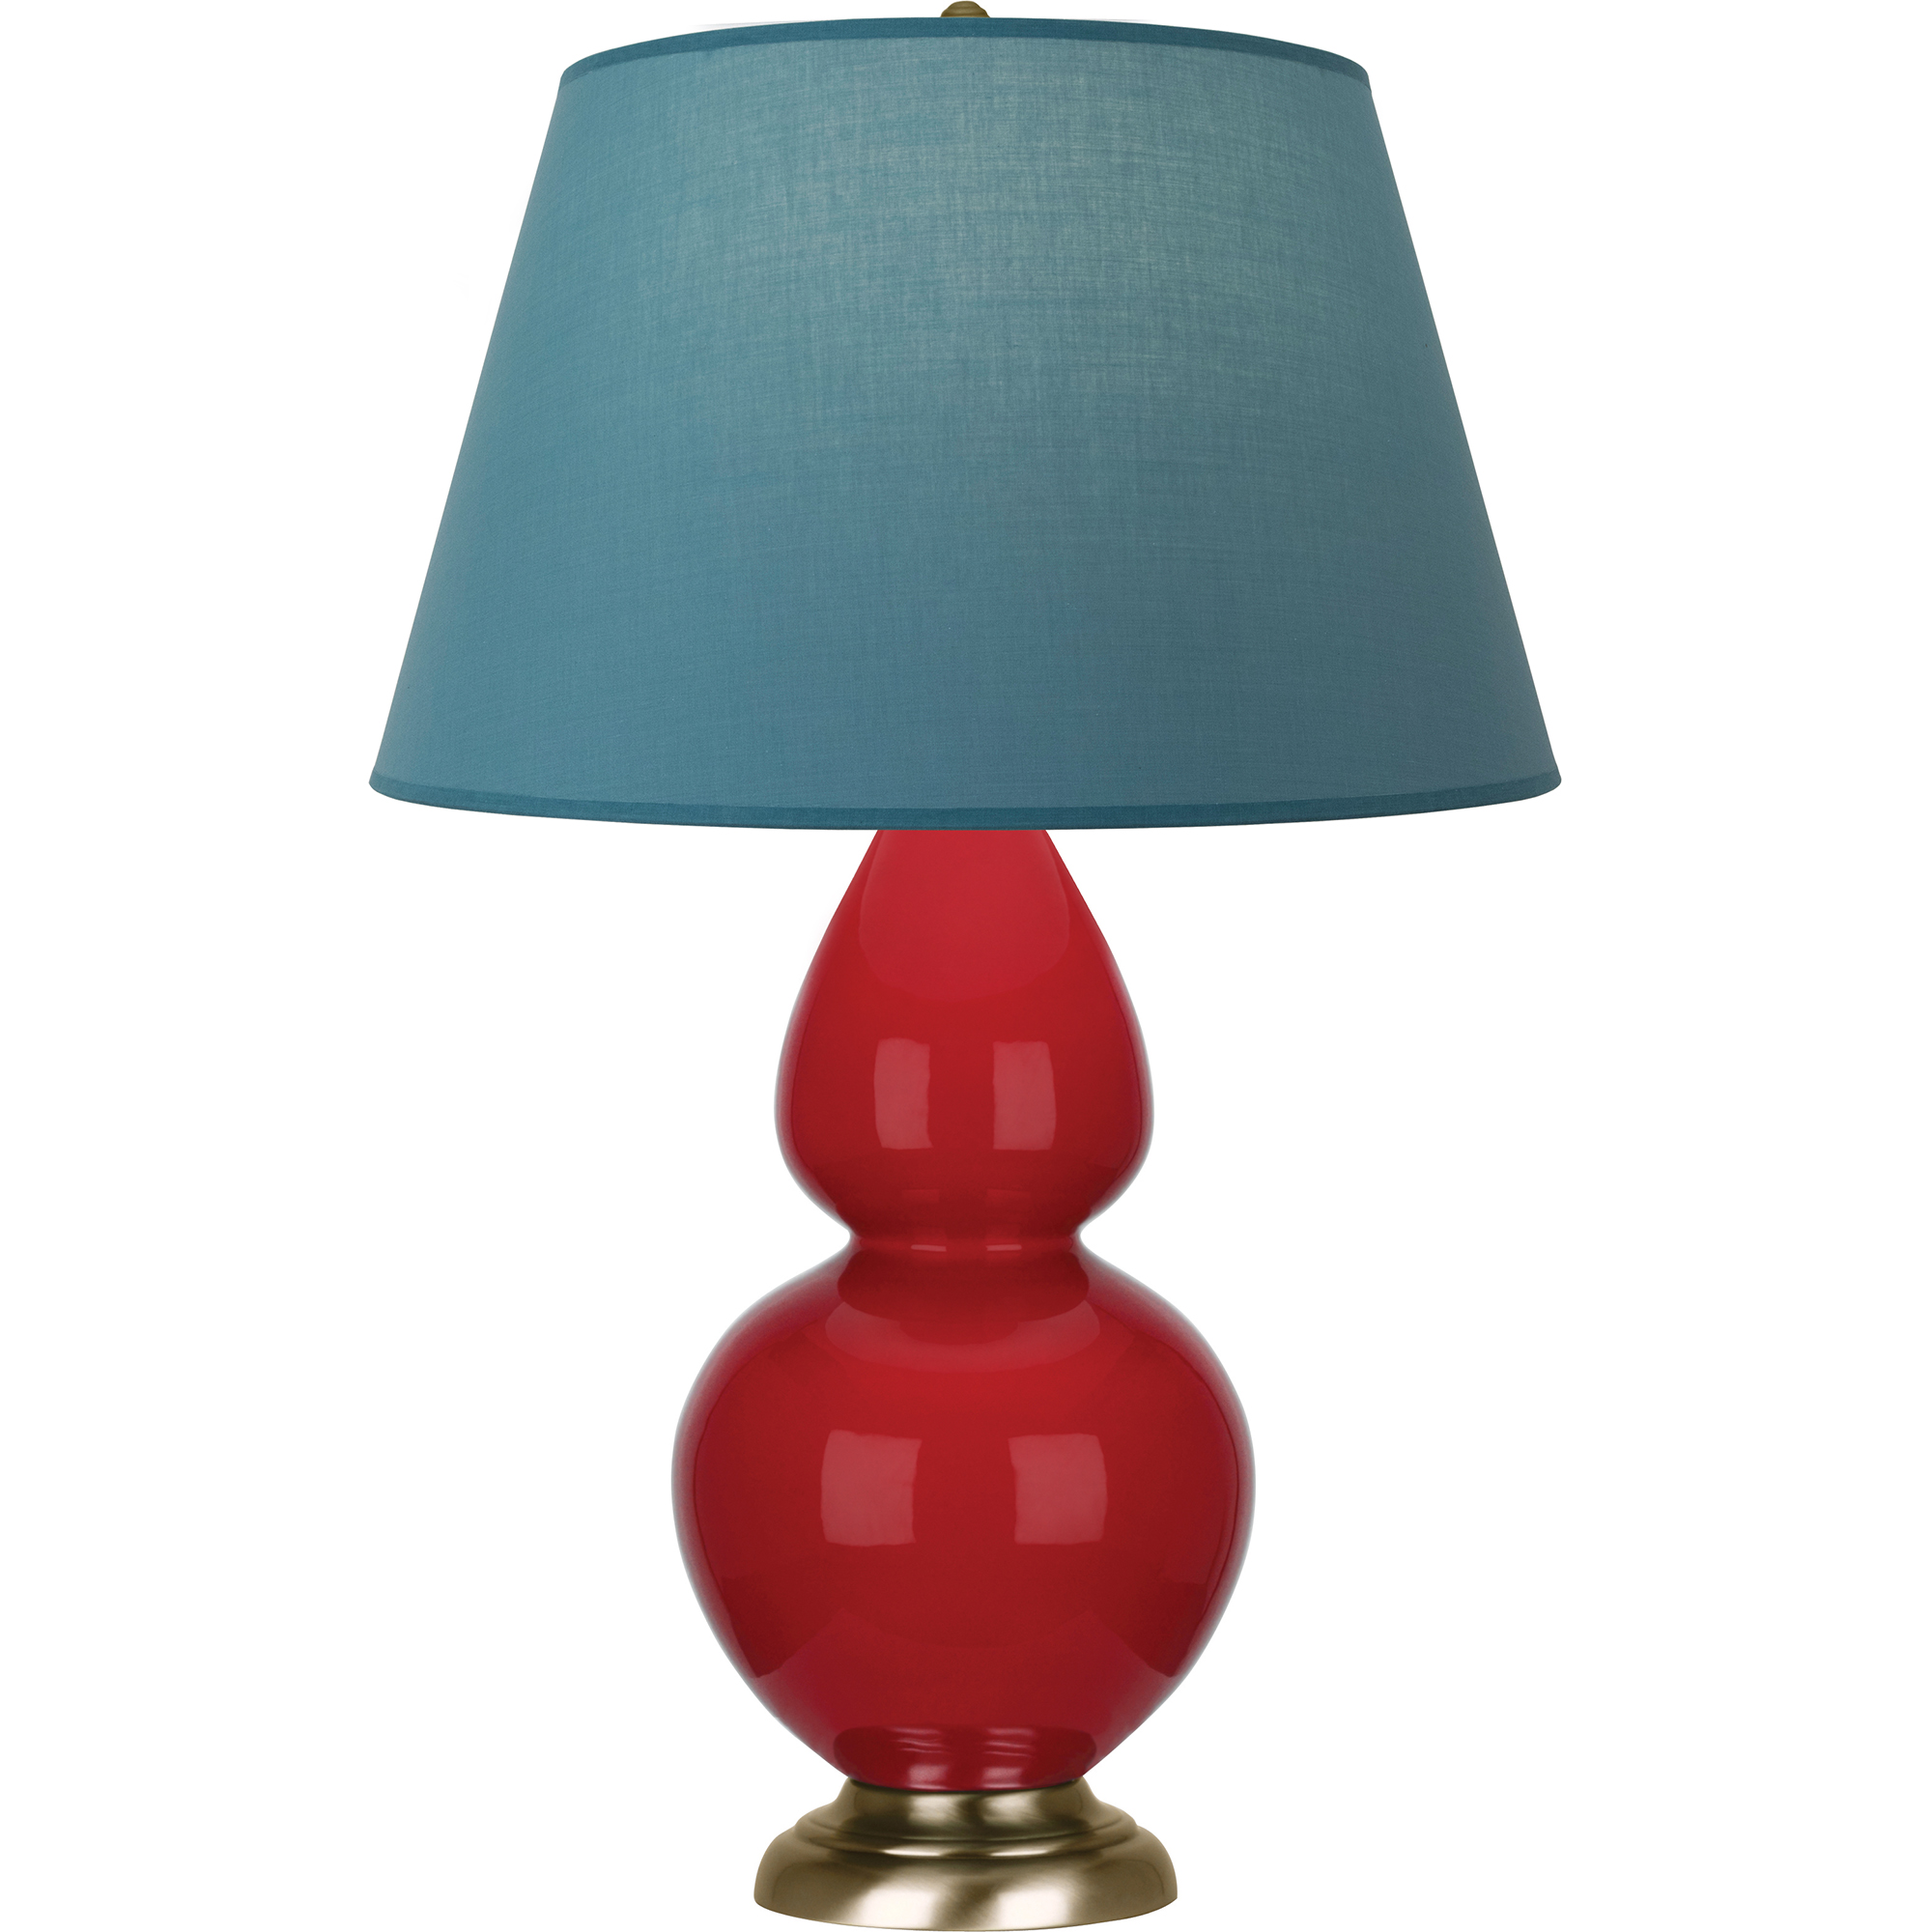 Double Gourd Table Lamp Style #RR20B